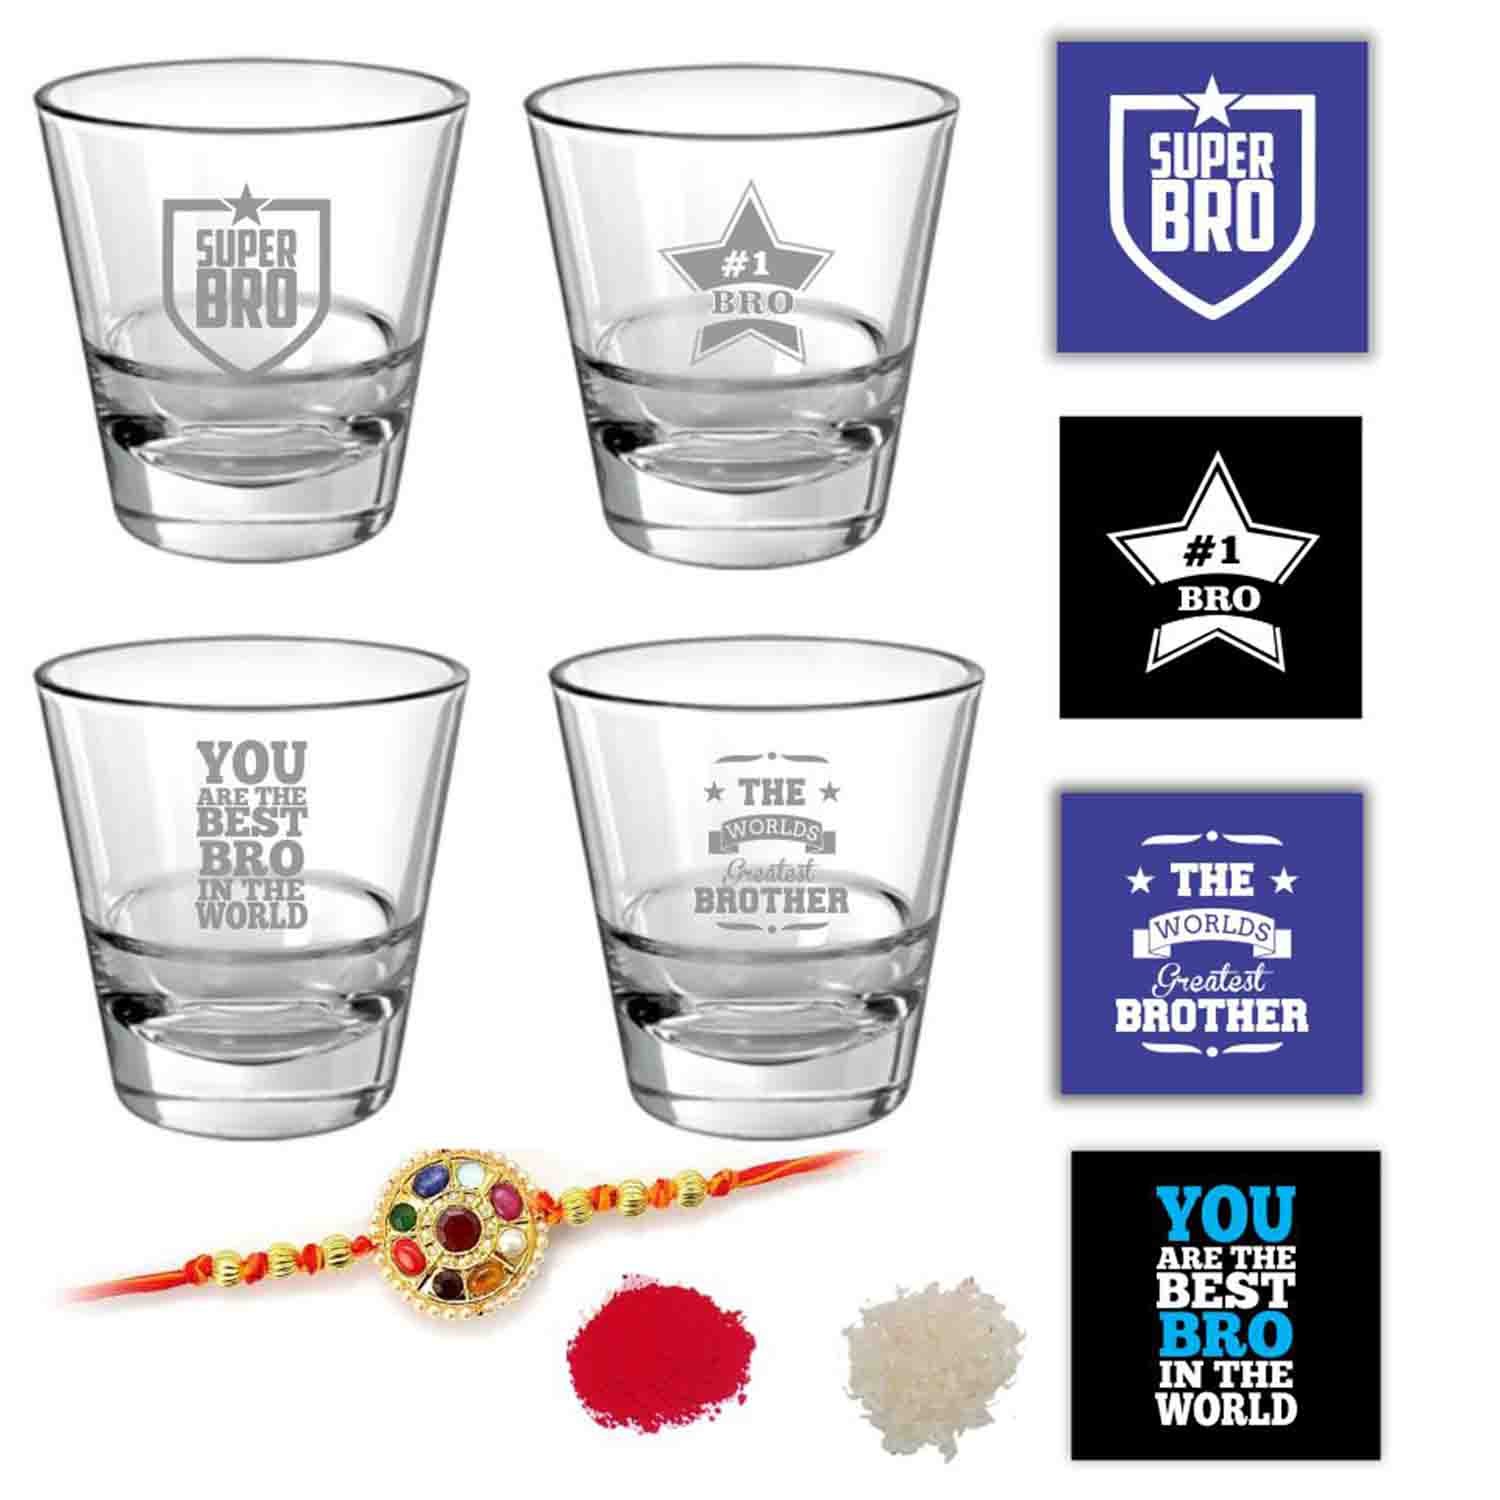 Starry No.1 Brother Whiskey Glasses Set of 4 With Rakhi